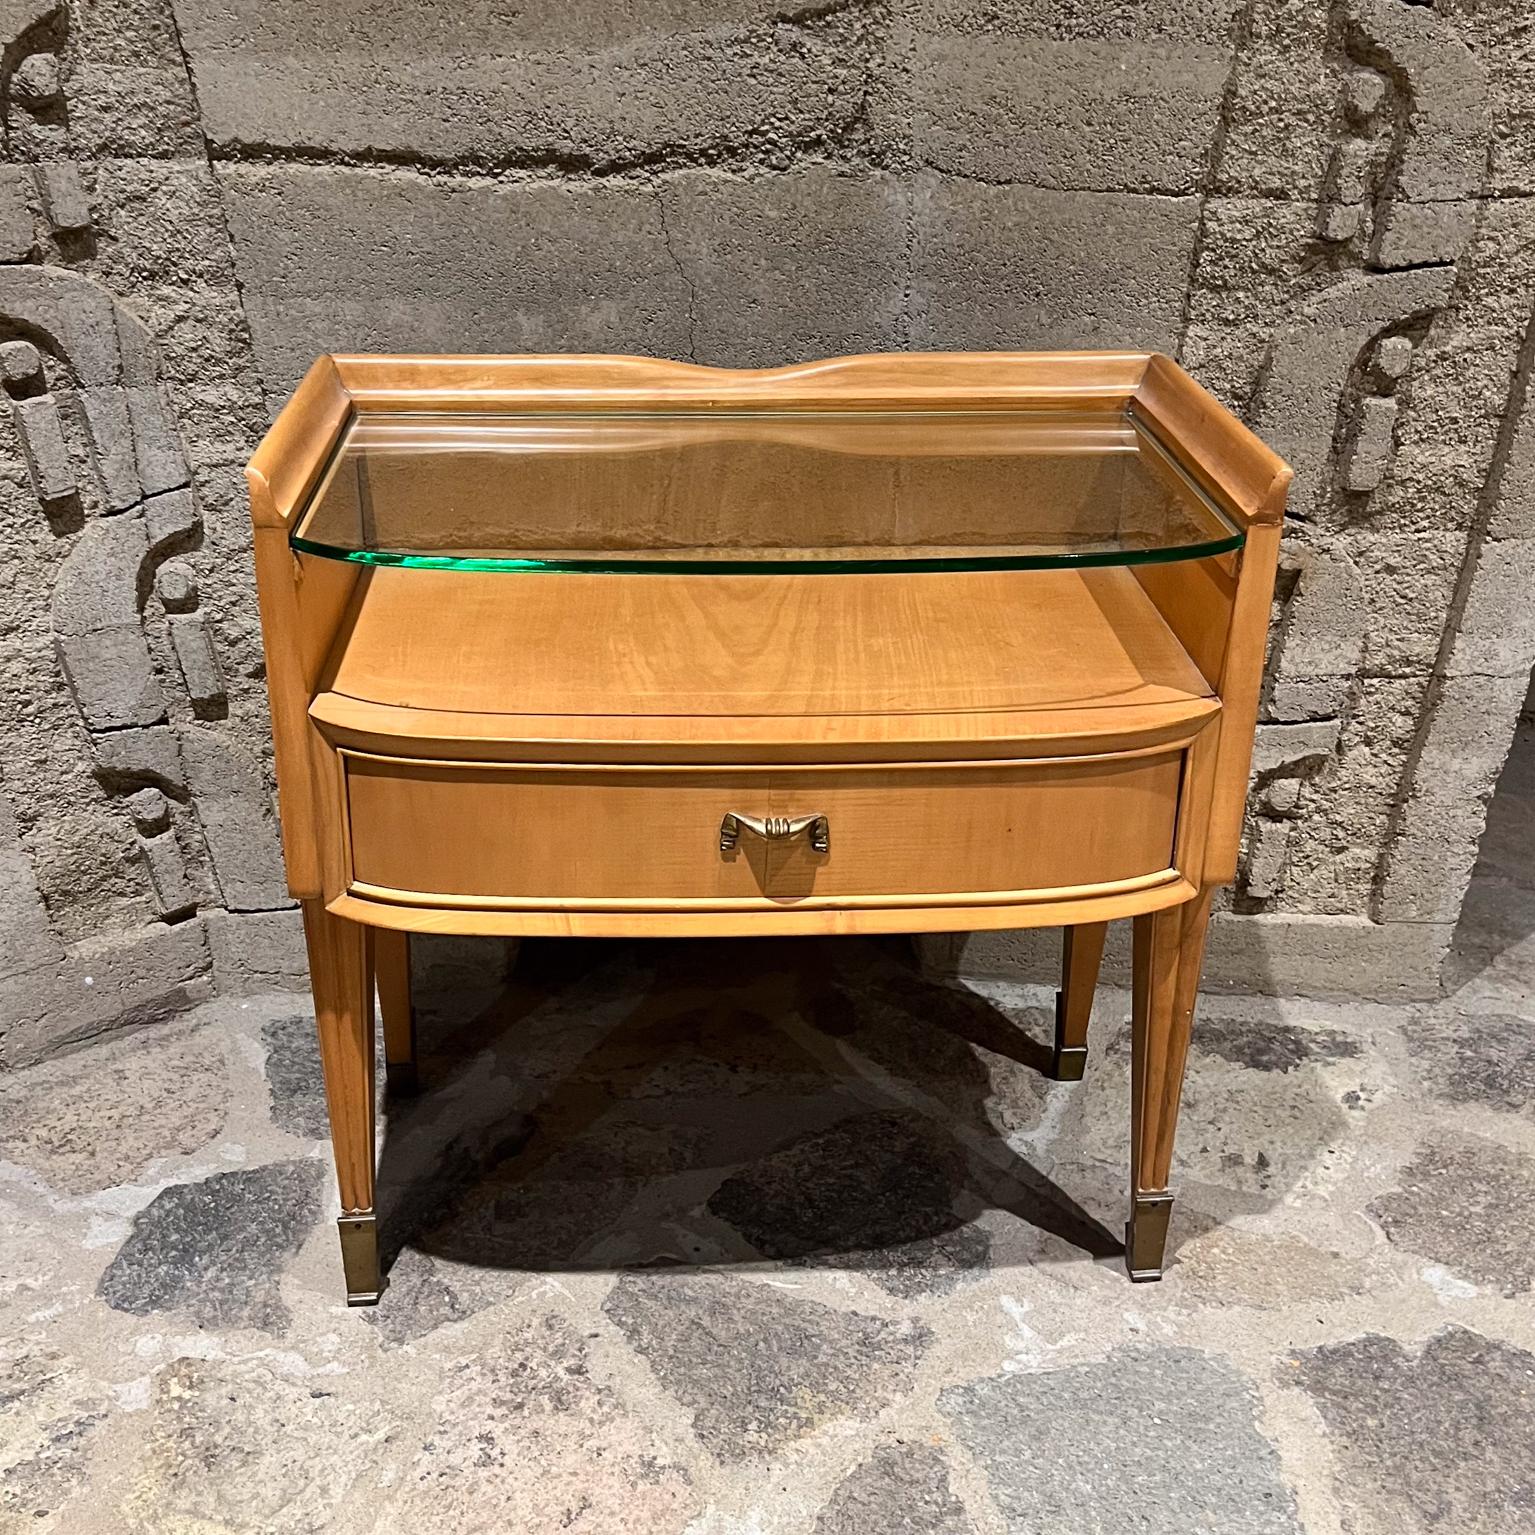 1940s Elegant Ash Wood Nightstand Bedside Table Italy
Ash wood with open glass custom shelf.
Solid brass accents. Double dove tail joints.
Unmarked
Attributed to Paolo Buffa
Similar to Vittorio Dassi, Ico Parisi, Gio Ponti & Osvaldo Borsani
24.25 h